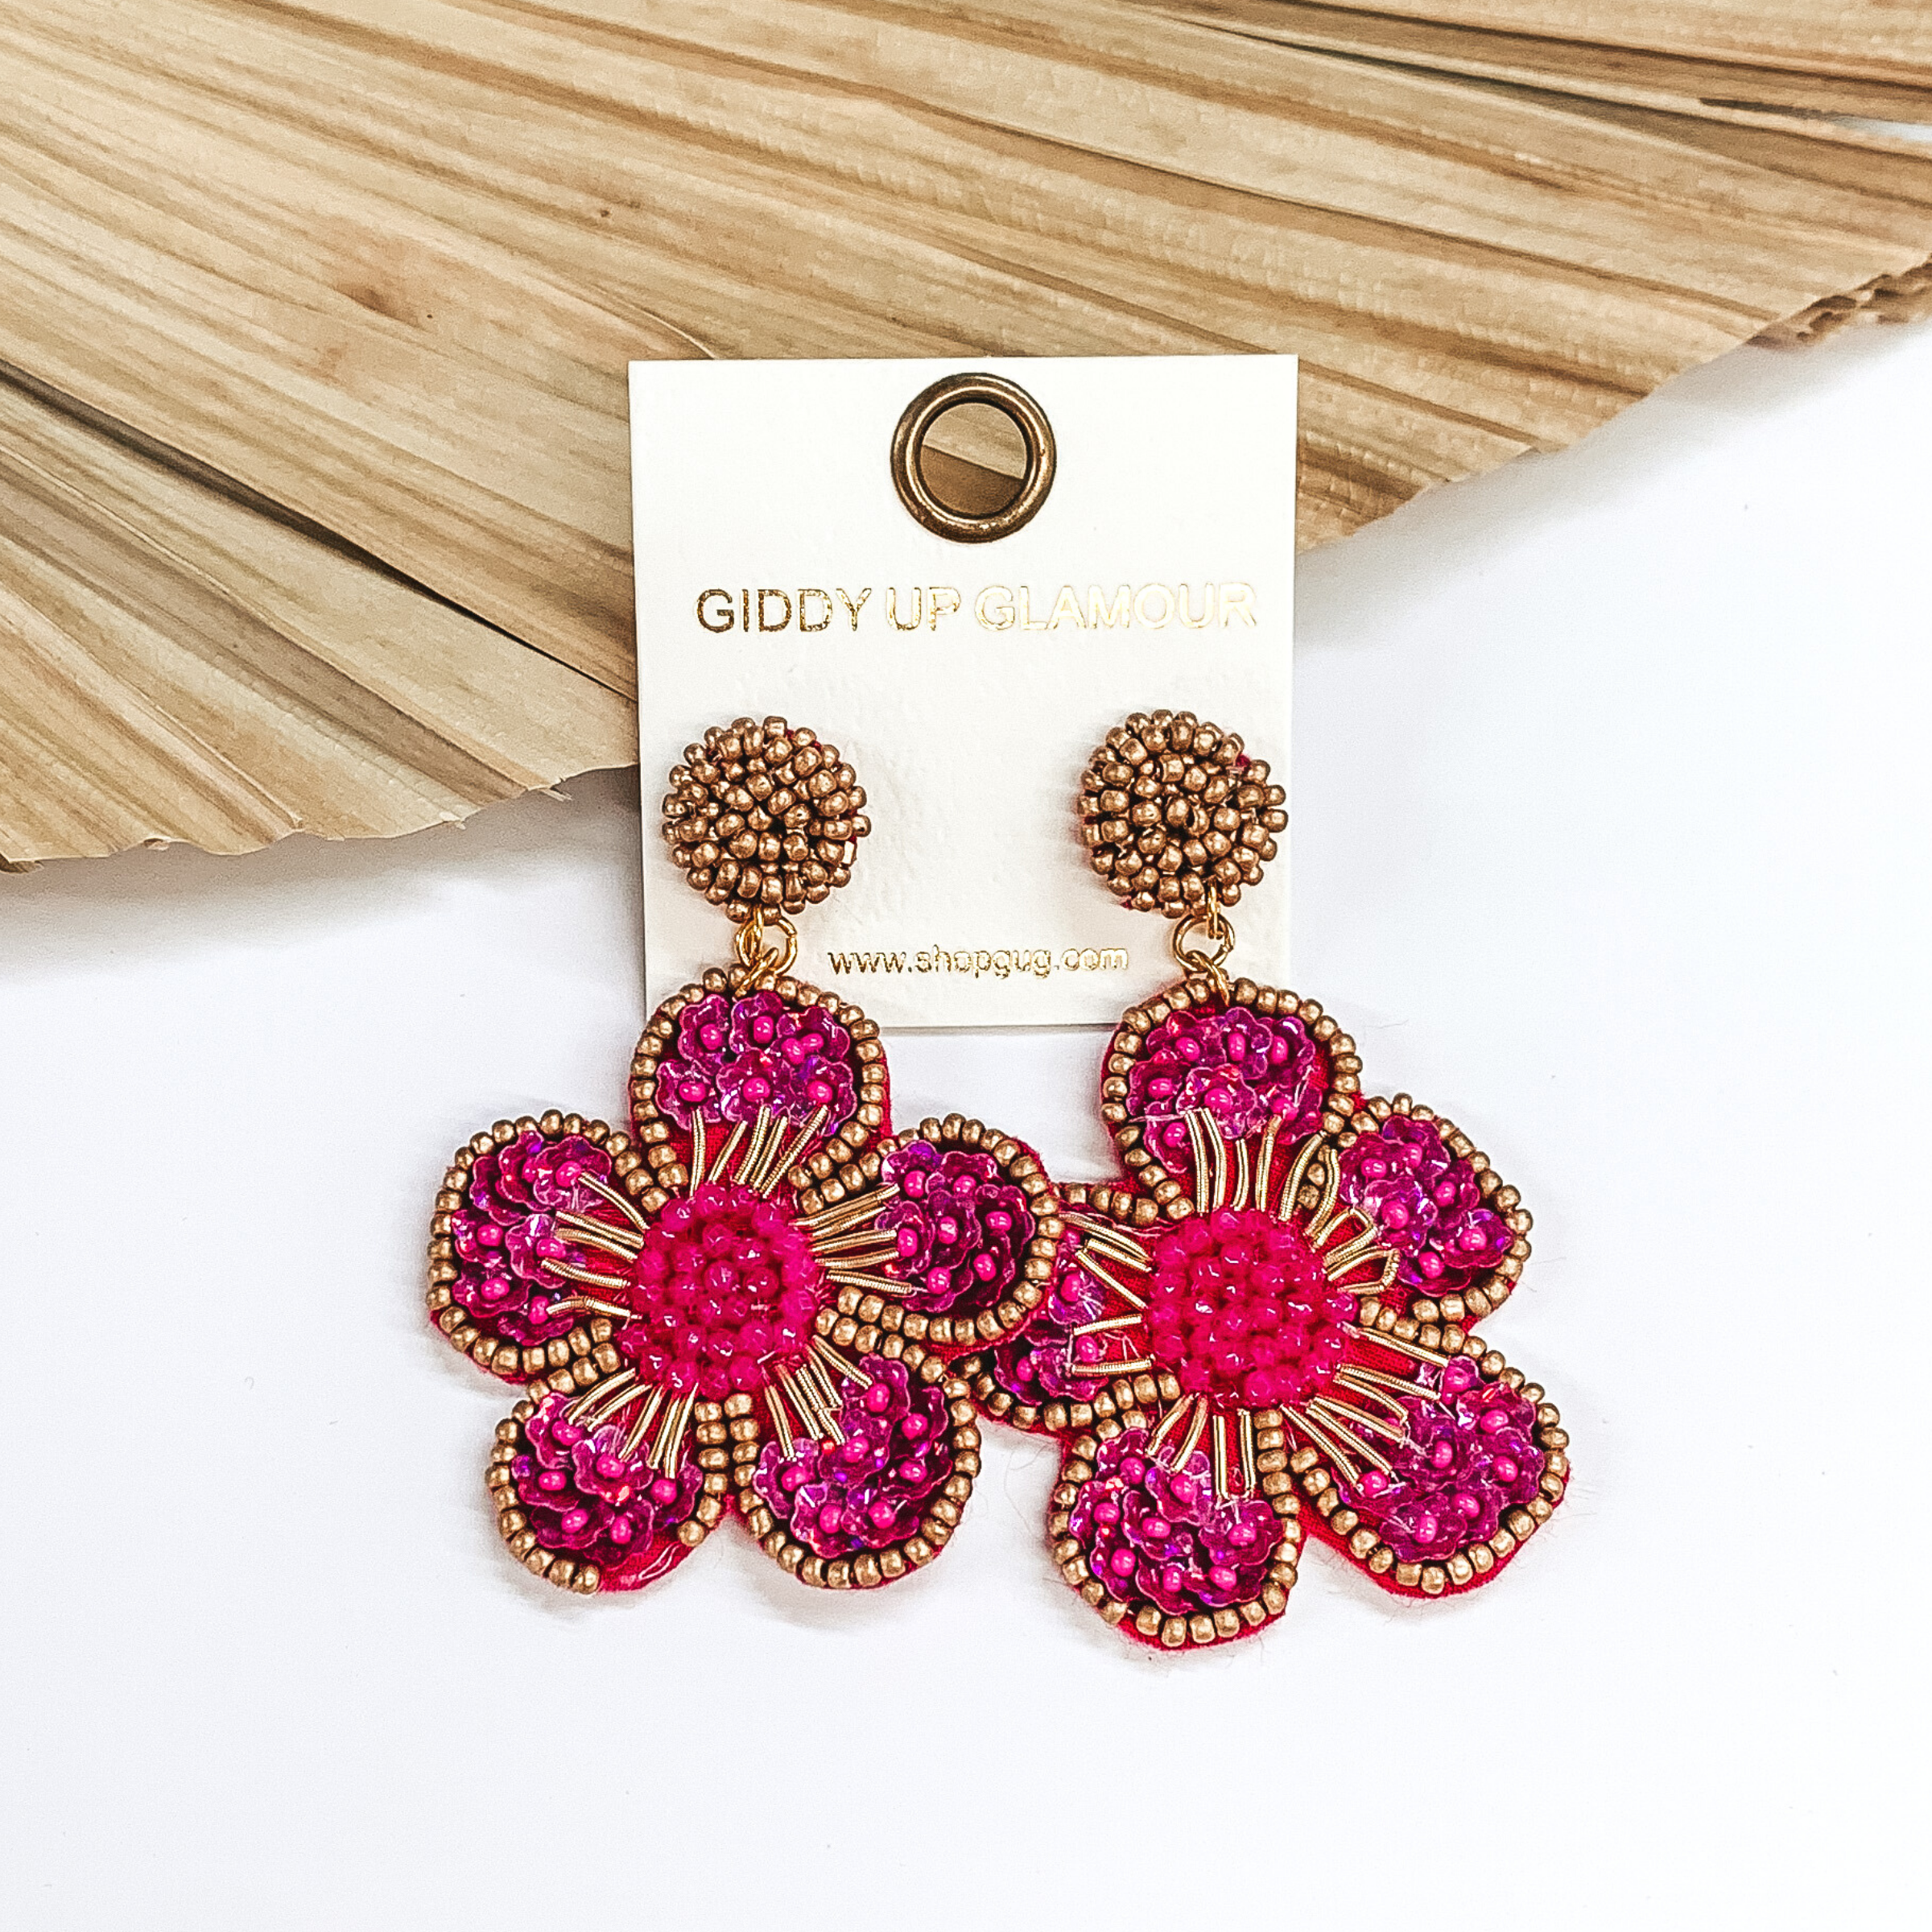 Gold beaded circle post back earrings. There is a hanging beaded flower pendant from the gold stud earrings. The flower pendant is fuchsia with a gold outline and detailing. These earrings are pictured on a white background with a dried palm leaf in the background. 